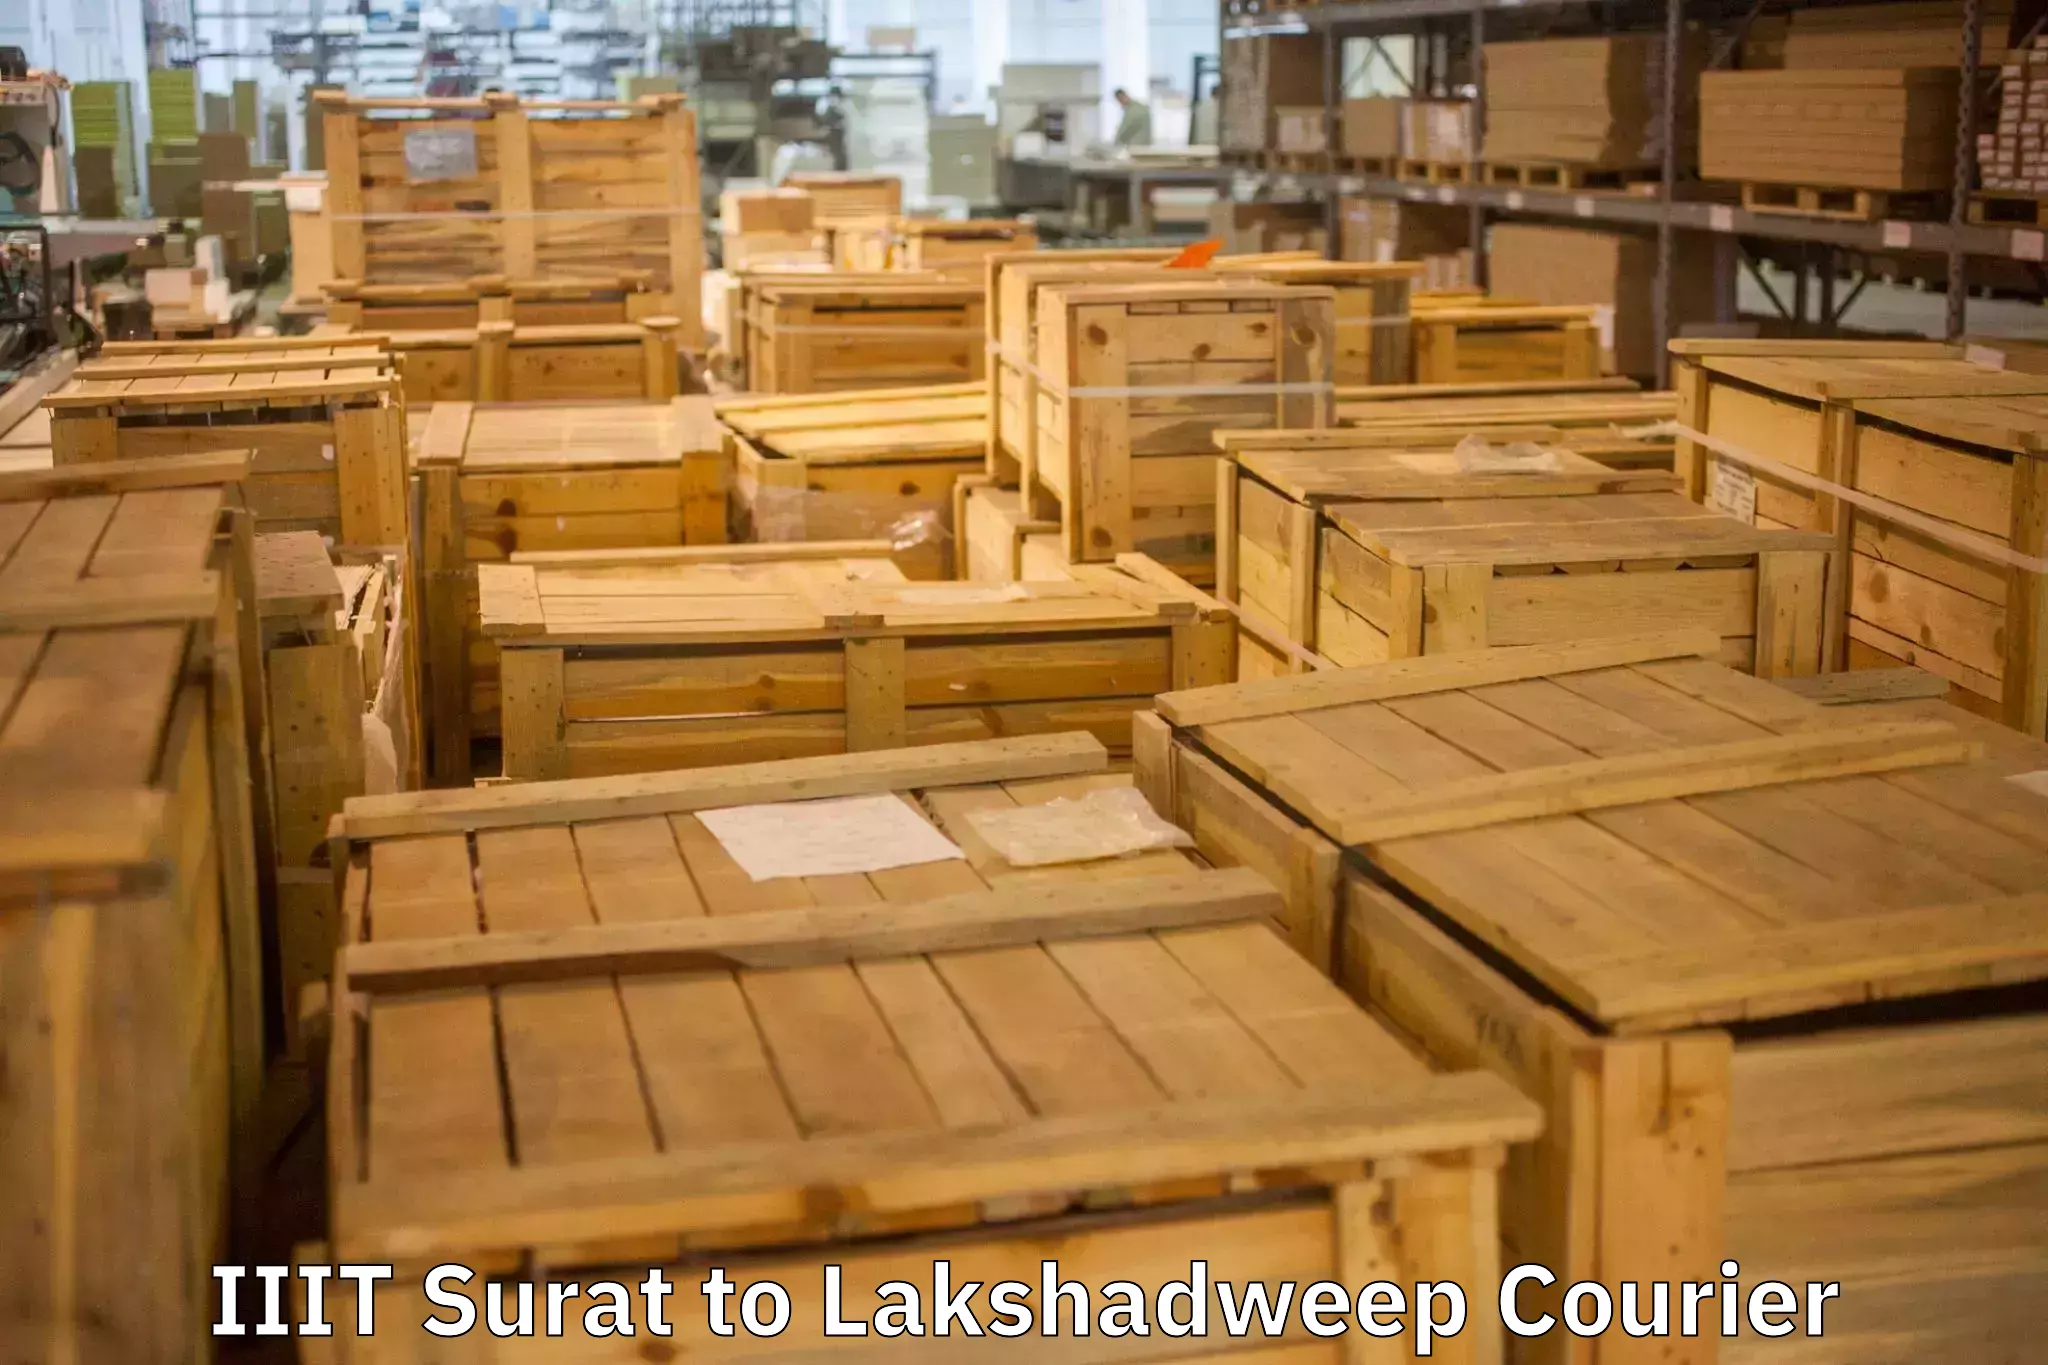 Home goods moving company IIIT Surat to Lakshadweep